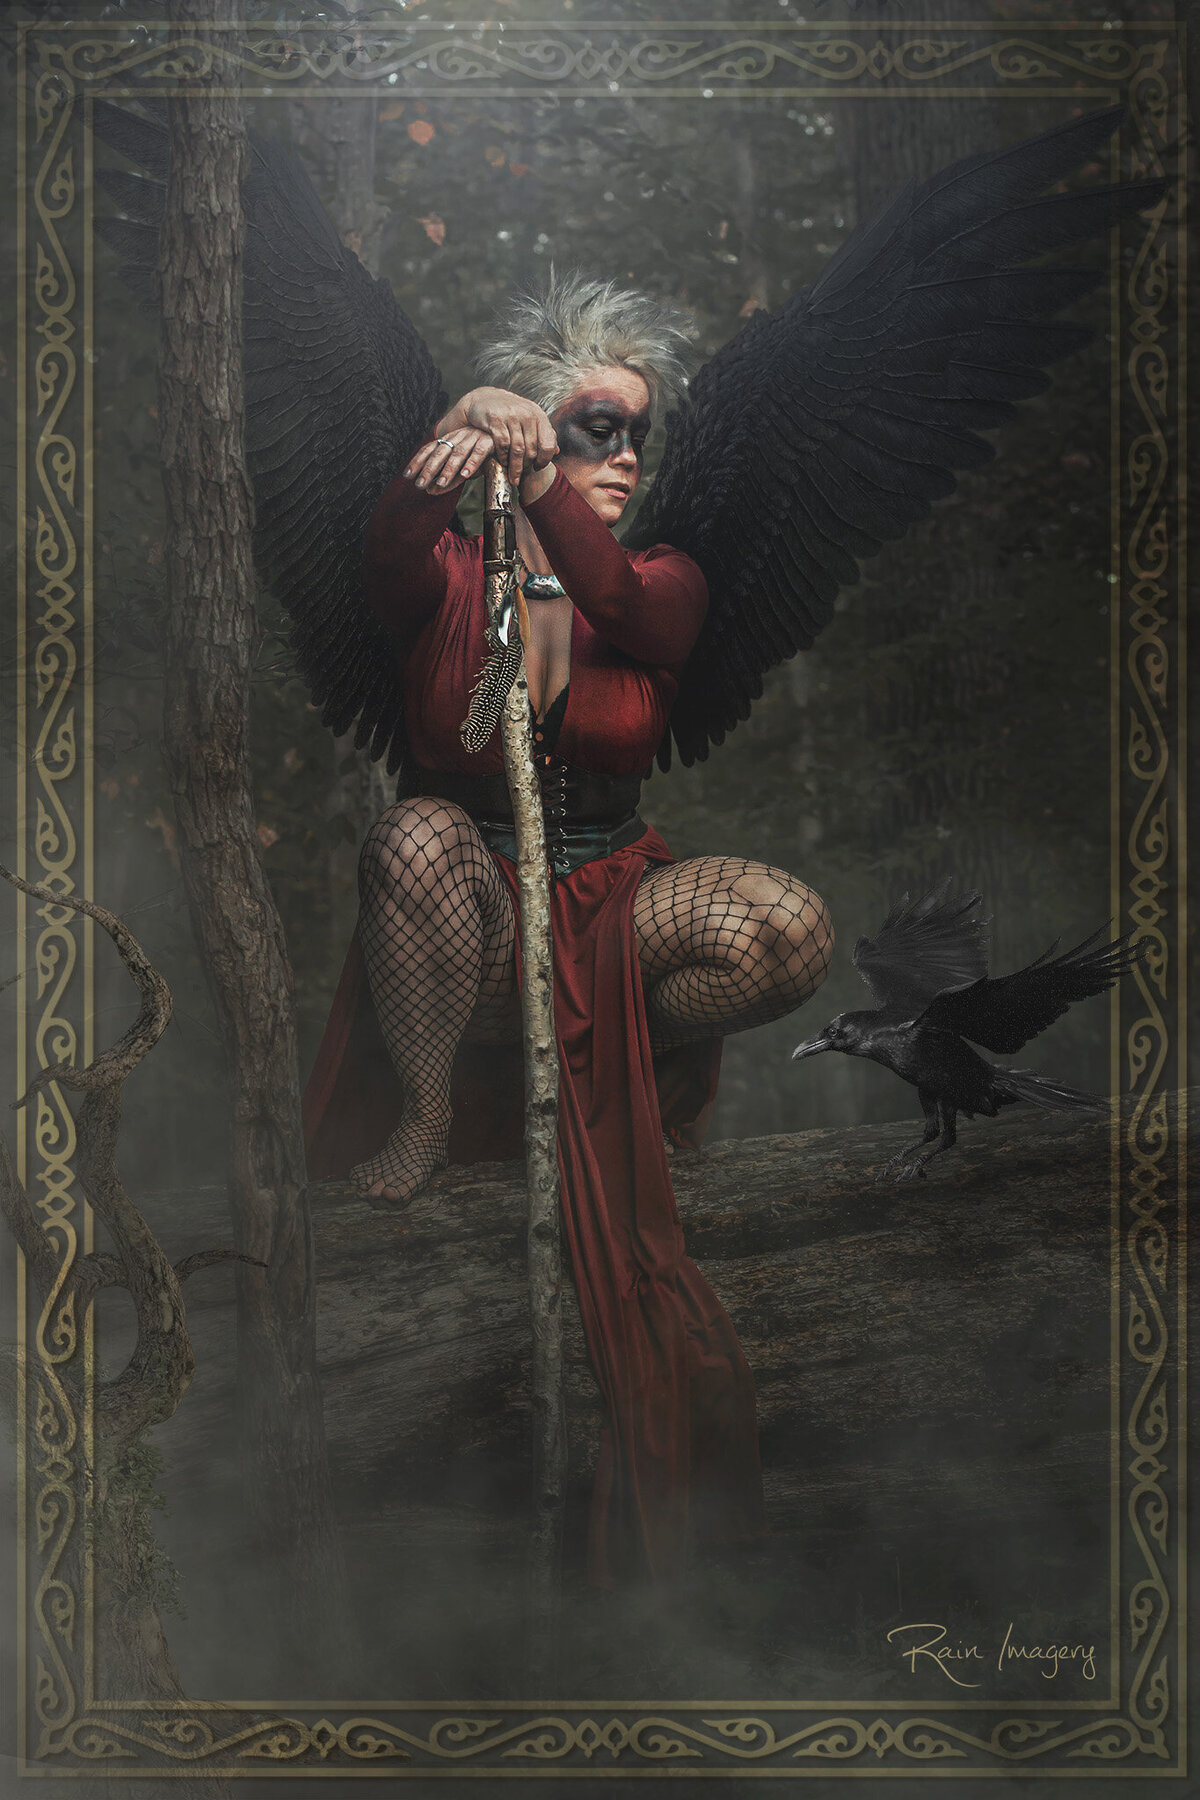 Fantasy portrait of a winged woman and a raven in the Virginia forest